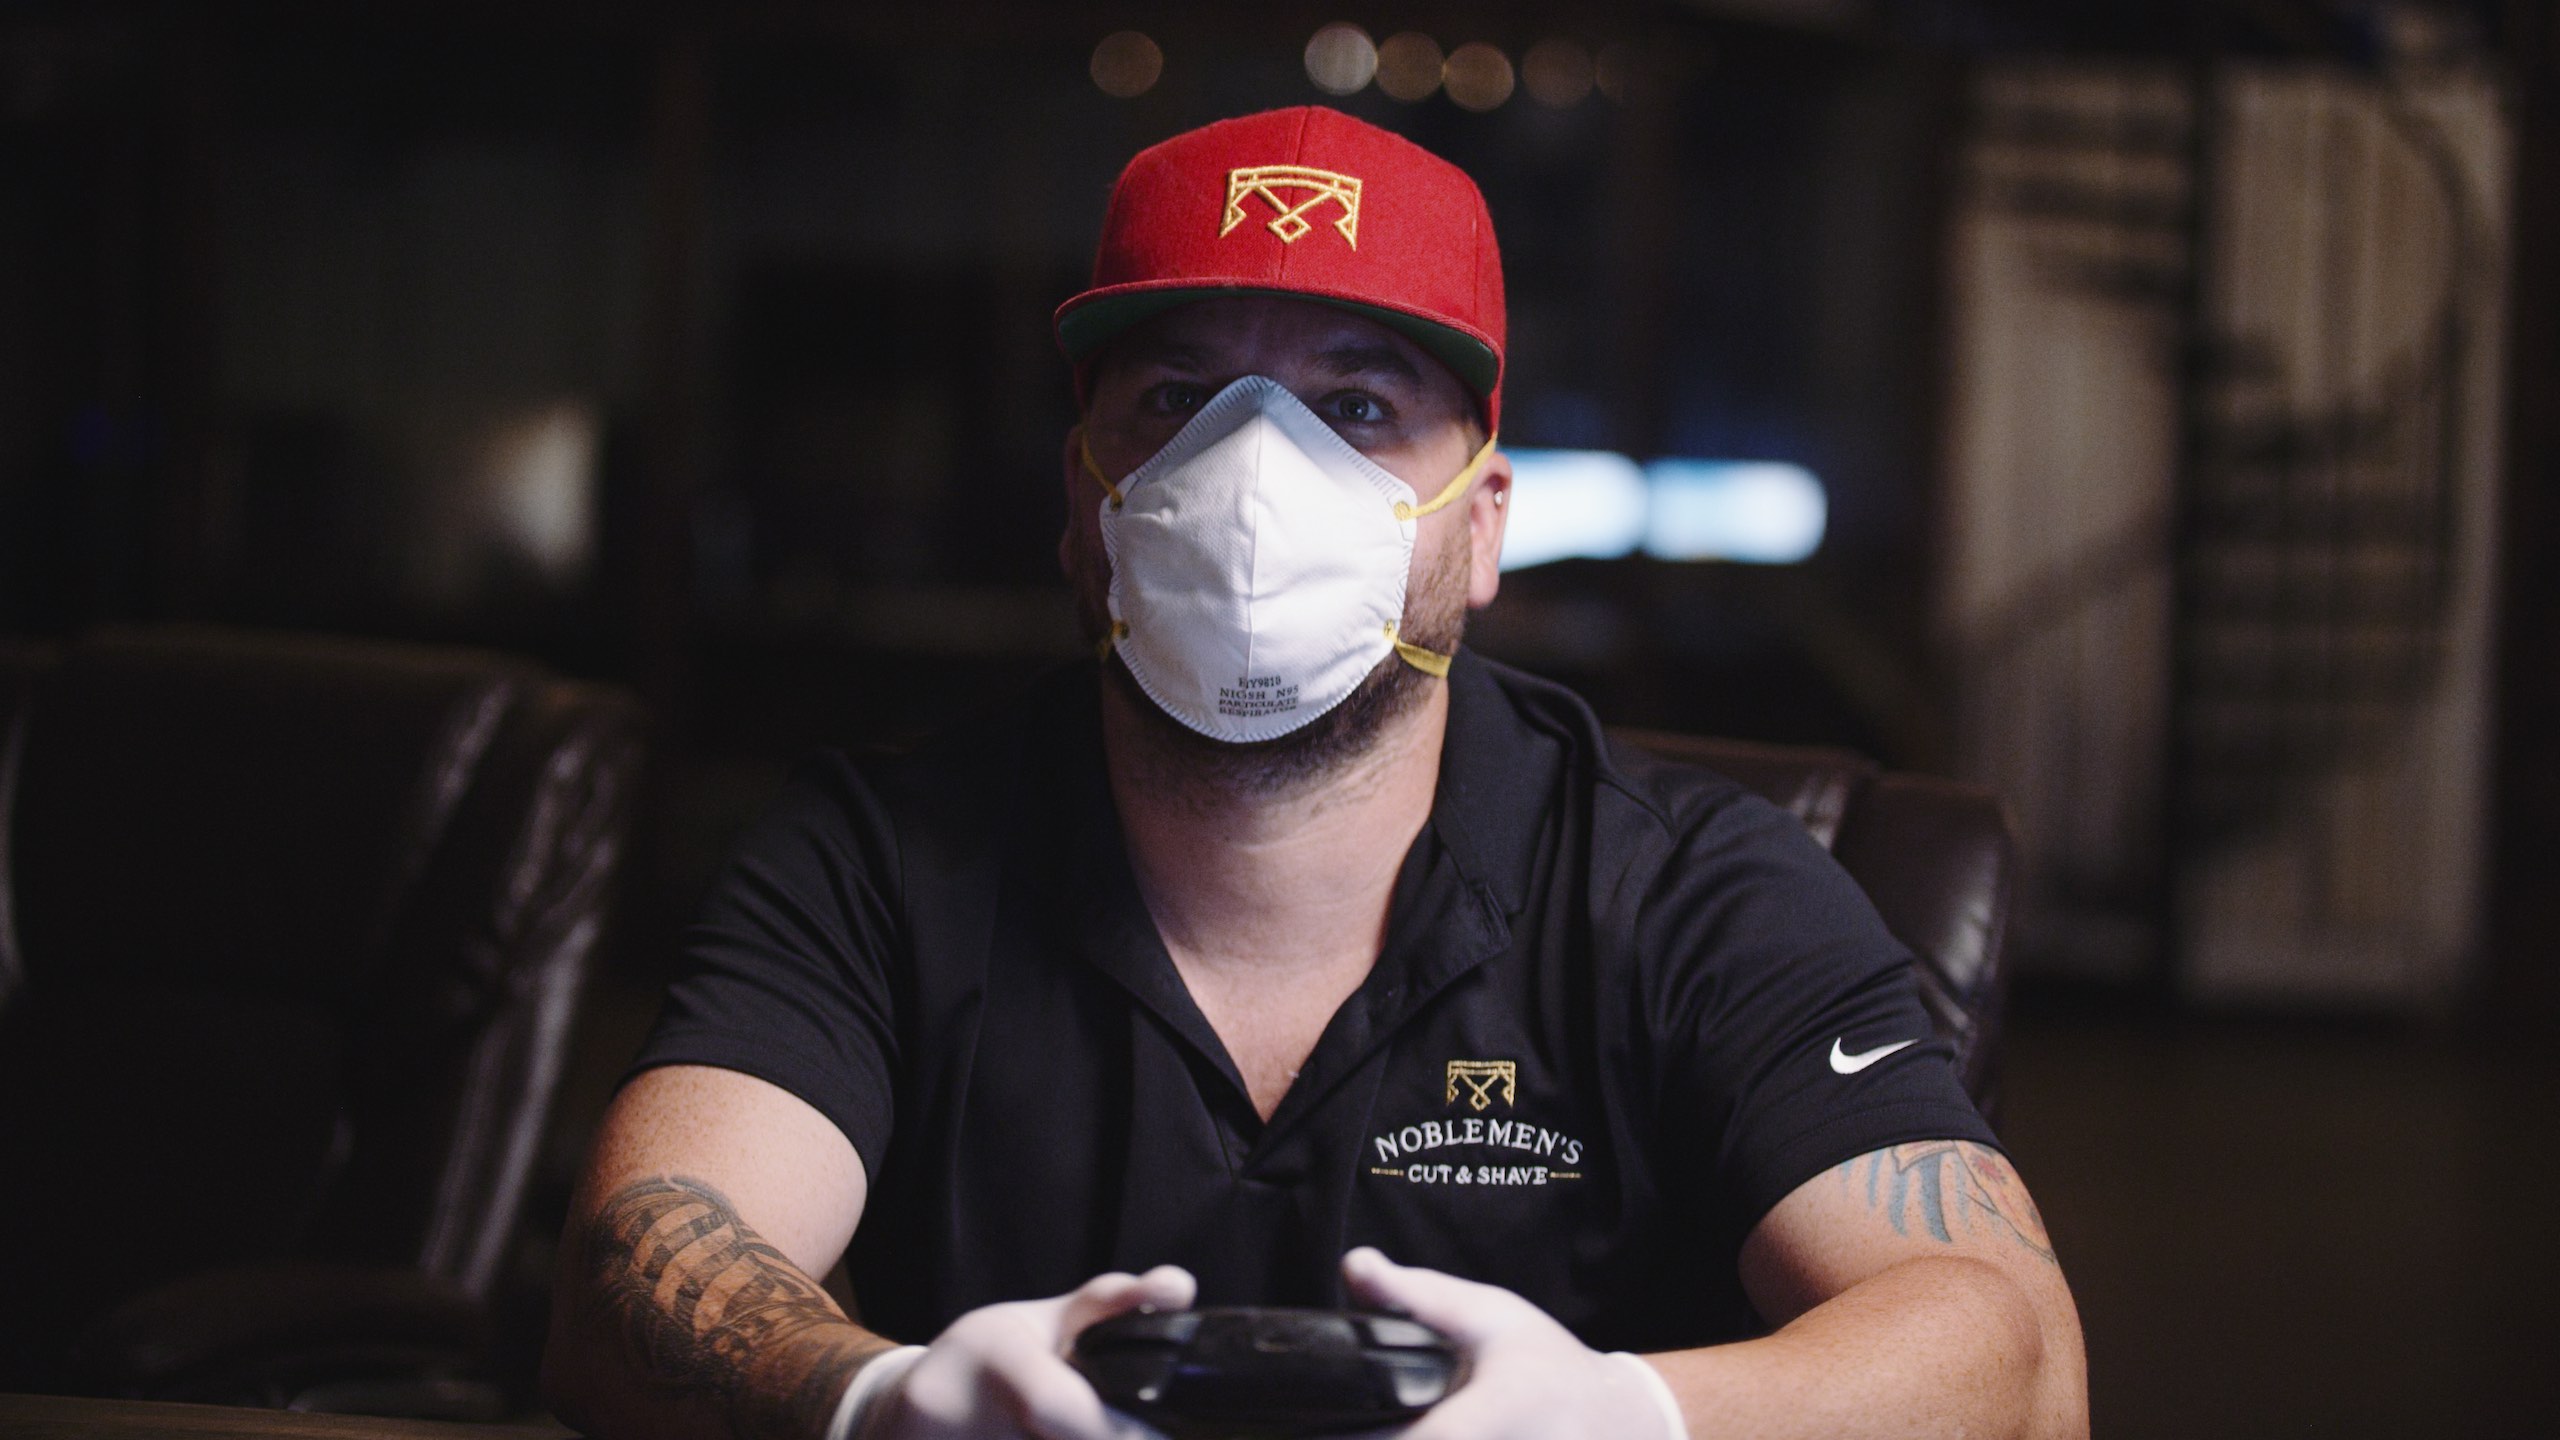 Reach Out and Play Tattooed man wearing red cap, black shirt and white mask using video game controller wearing white latex gloves